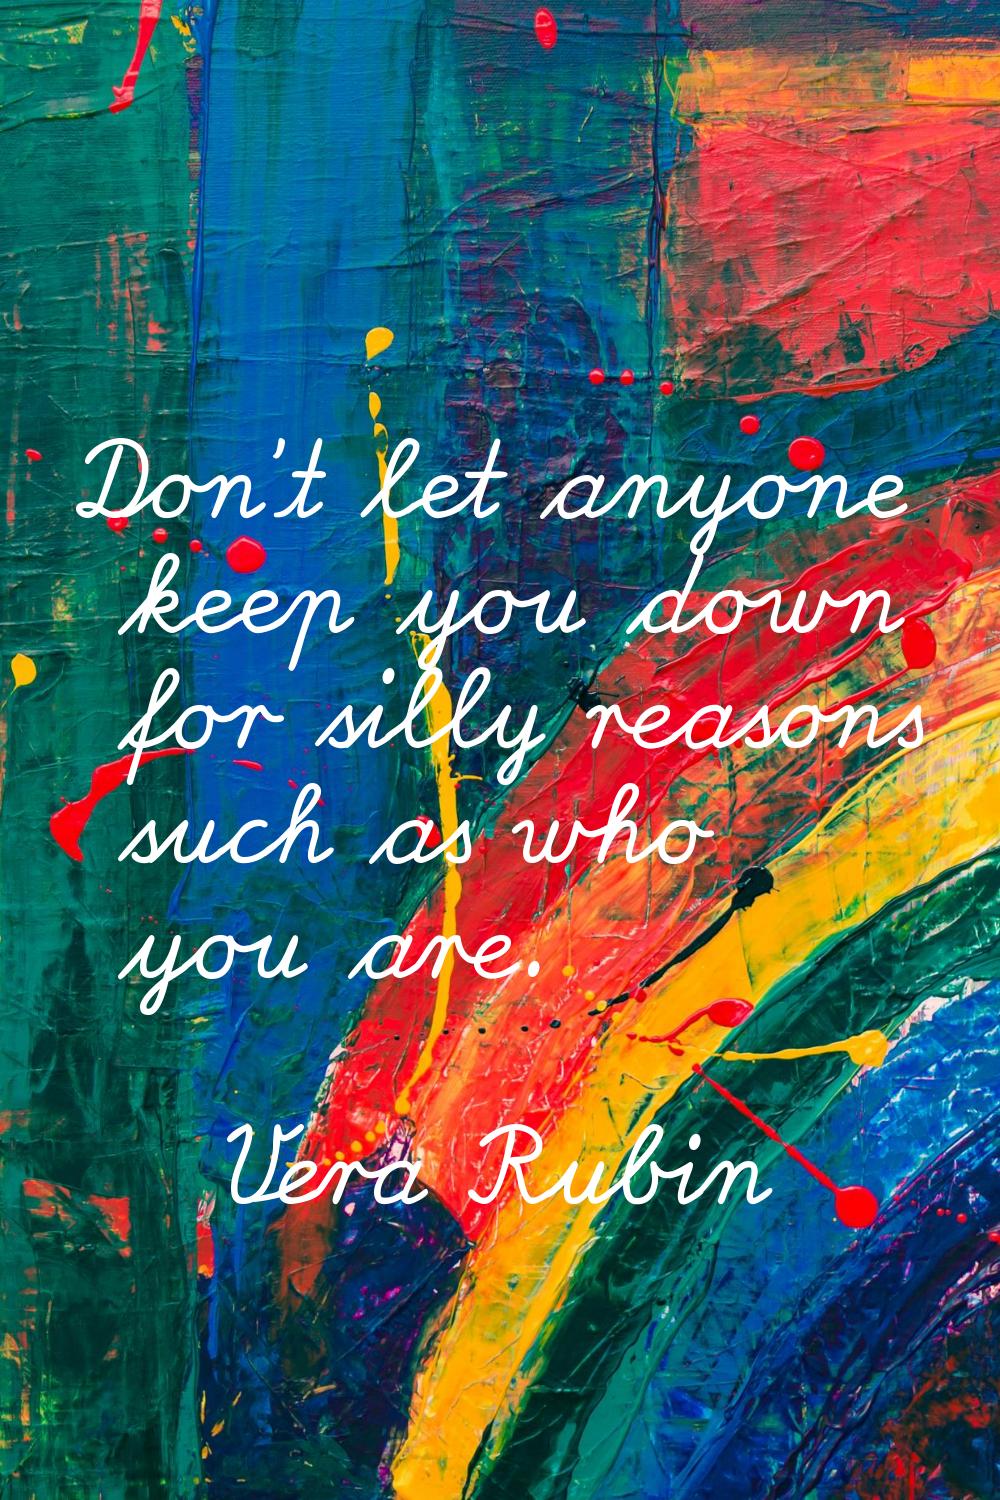 Don't let anyone keep you down for silly reasons such as who you are.